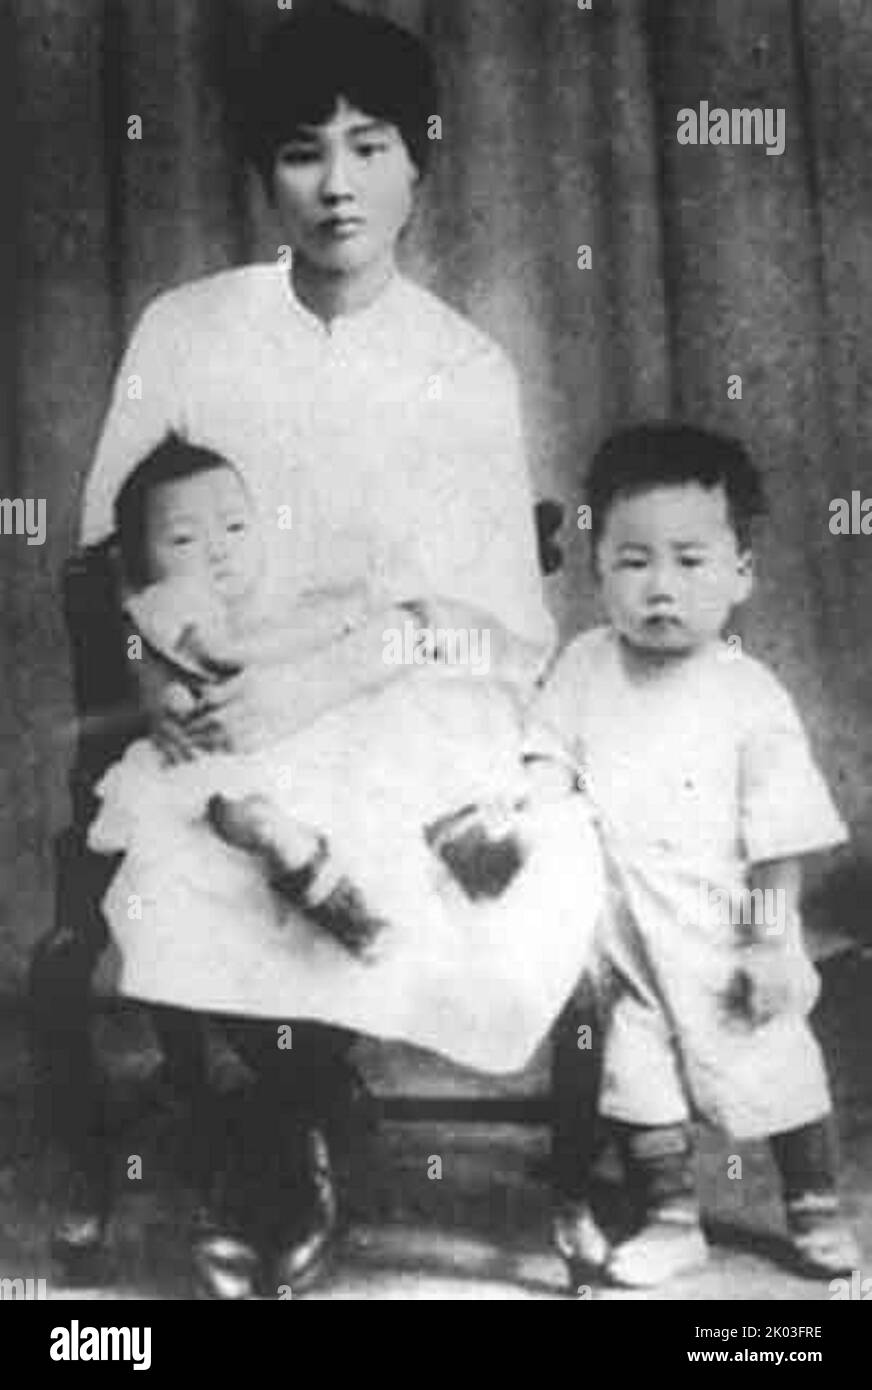 Yang Kaihui he her sons: Mao Anqing and Mao Anying. Yang Kaihui (1901 - 1930) was the second wife of Mao Zedong, whom he married in 1920. She had three children with Mao Zedong: Mao Anying, Mao Anqing, and Mao Anlong. Stock Photo